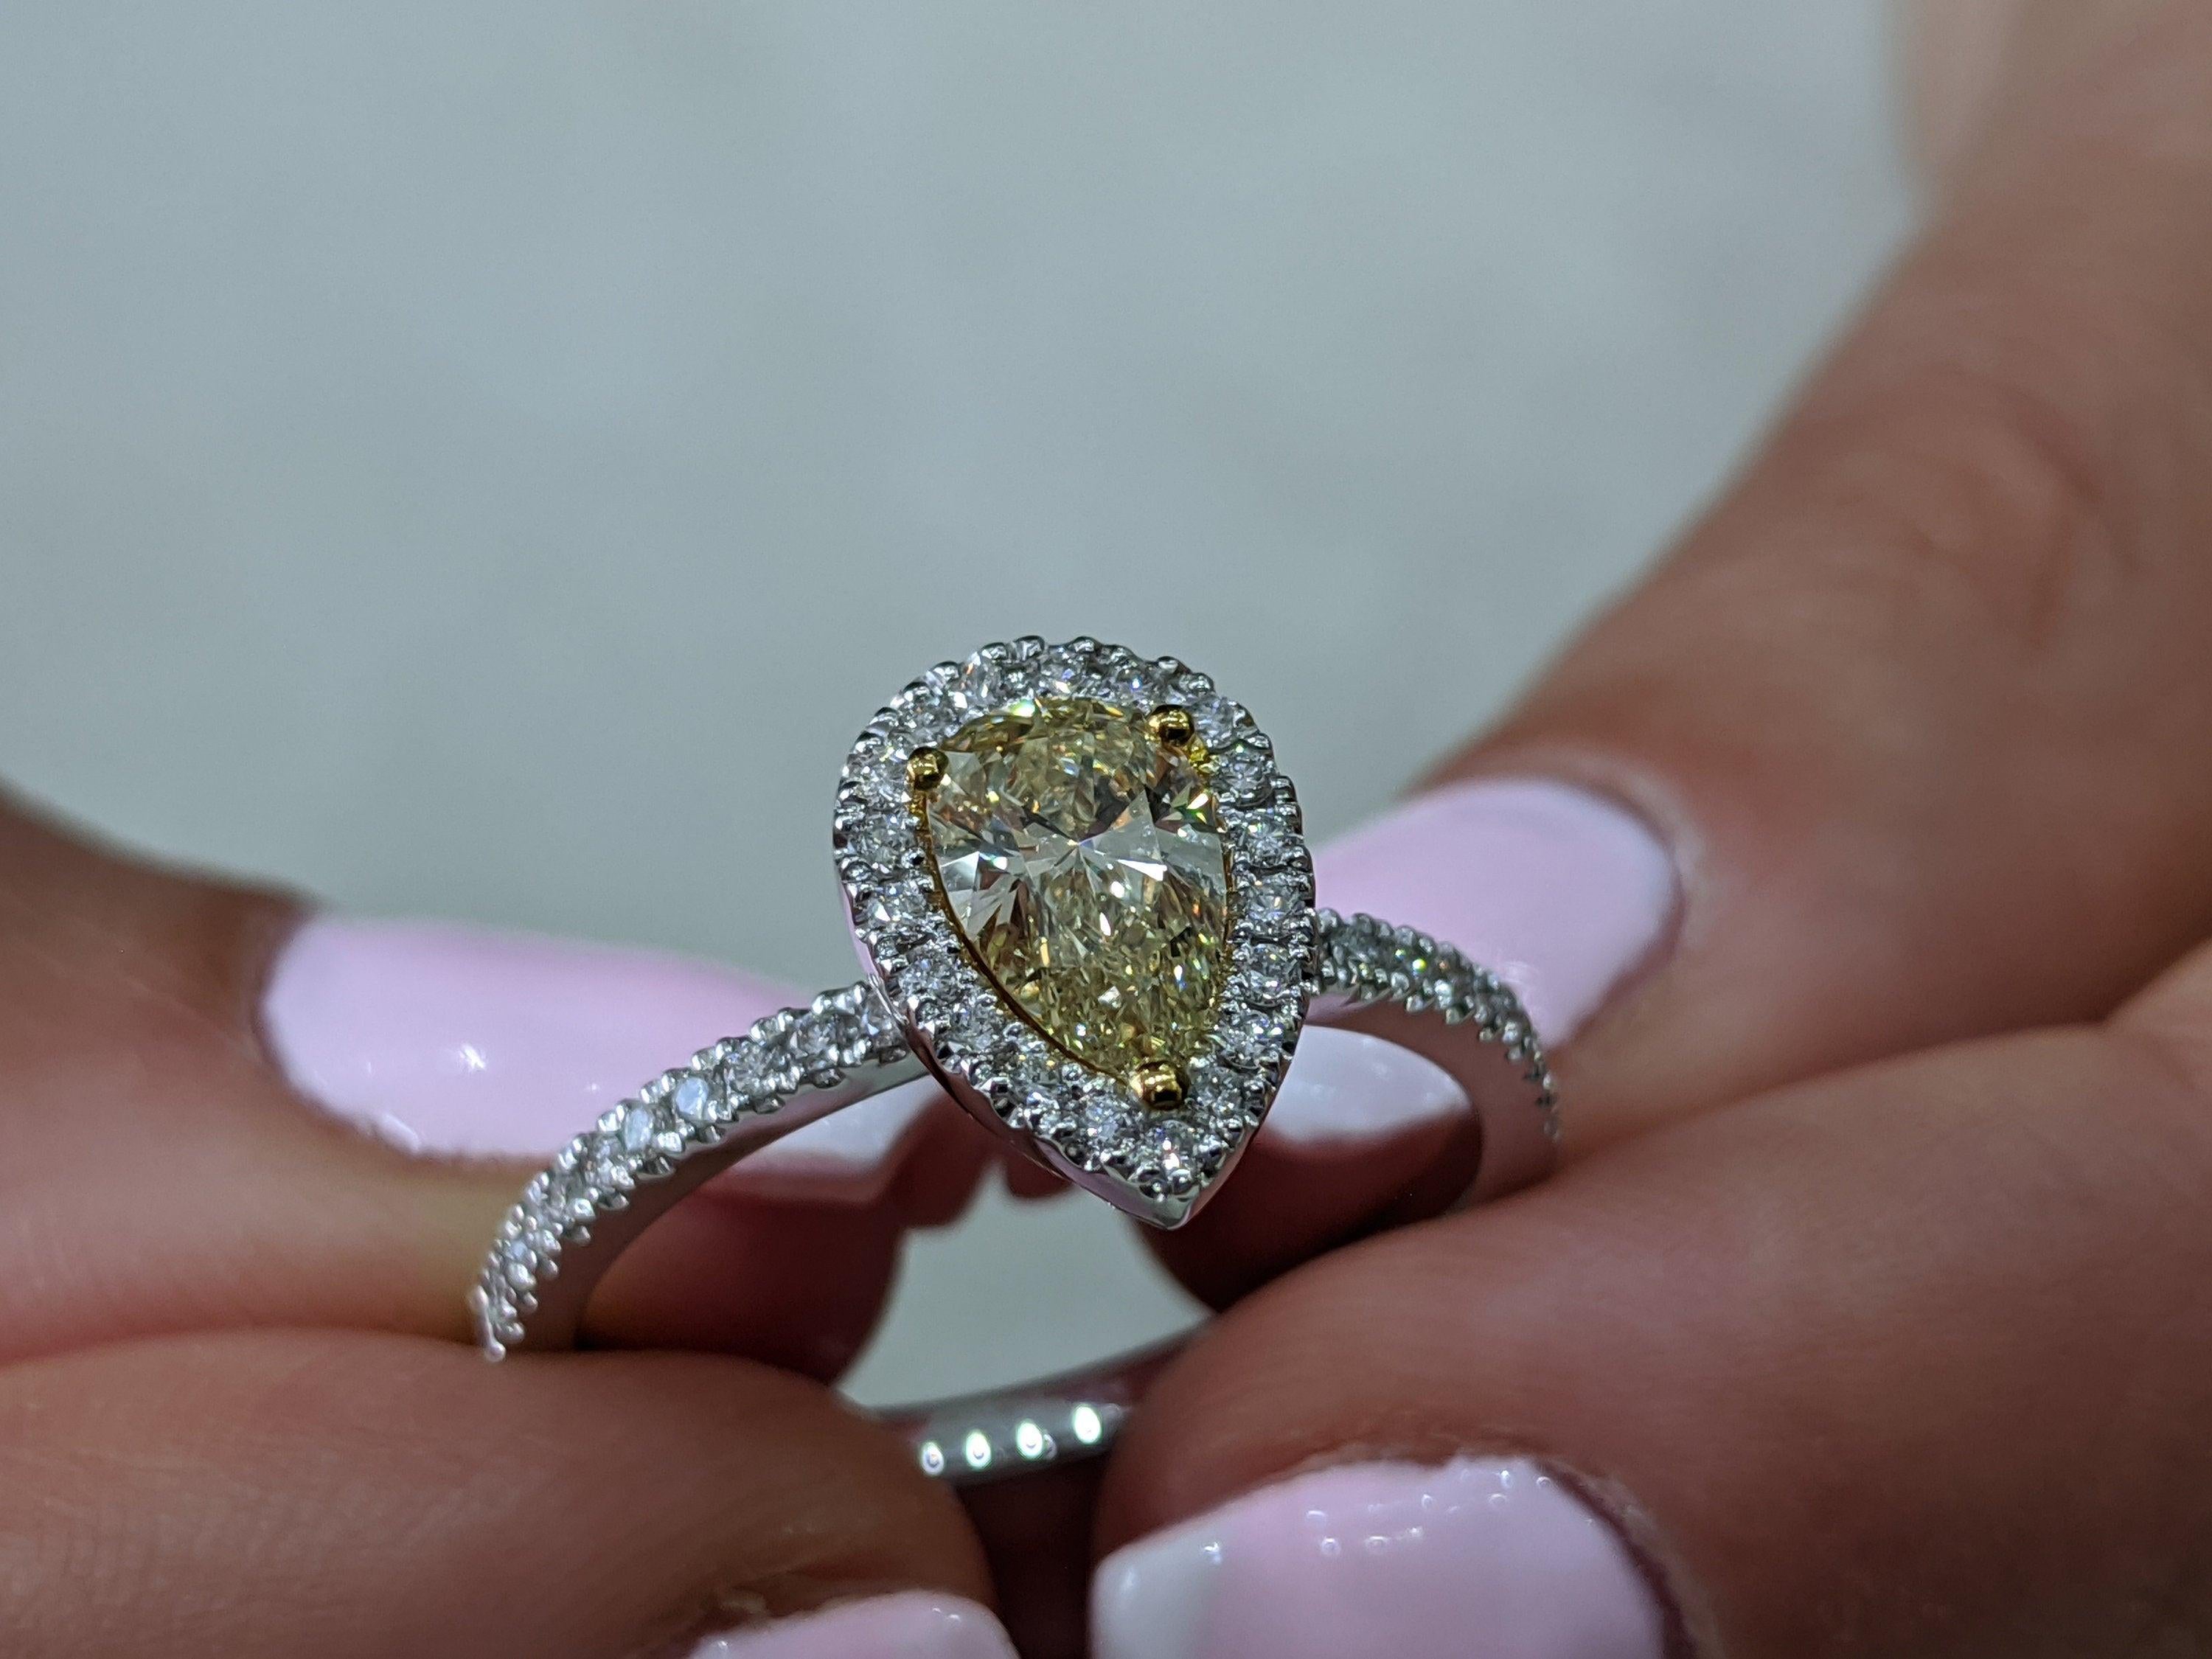 Pear Diamond Ring, Pear Engagement Ring, Pear Halo Ring, Fancy Yellow Pear Diamond Engagement Ring, Pear Shape Ring, Pear Cut Diamond
 
 A beautiful pear shaped diamond engagement ring made of 14K White Gold set with a fancy yellow diamond of 0.70ct